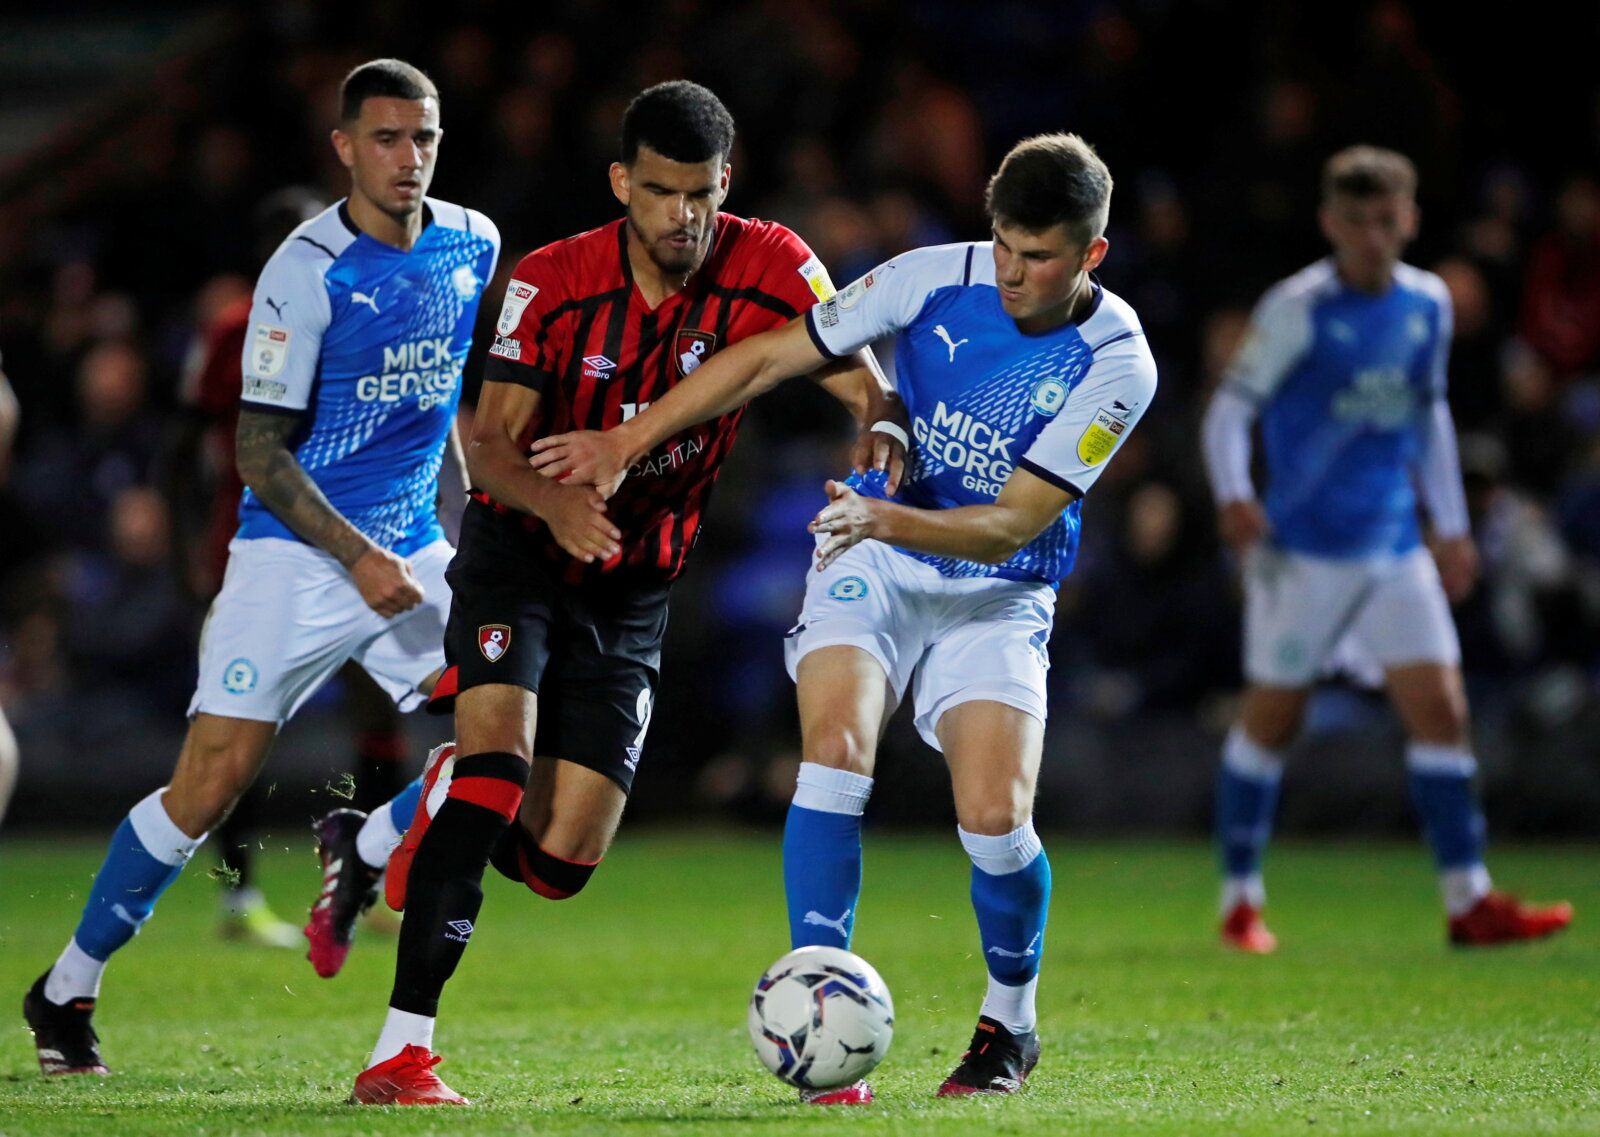 Soccer Football - Championship - Peterborough United v AFC Bournemouth - Weston Homes Stadium, Peterborough, Britain - September 29, 2021  Bournemouth's Dominic Solanke in action with Peterborough United’s Ronnie Edwards Action Images/Andy Couldridge  EDITORIAL USE ONLY. No use with unauthorized audio, video, data, fixture lists, club/league logos or 